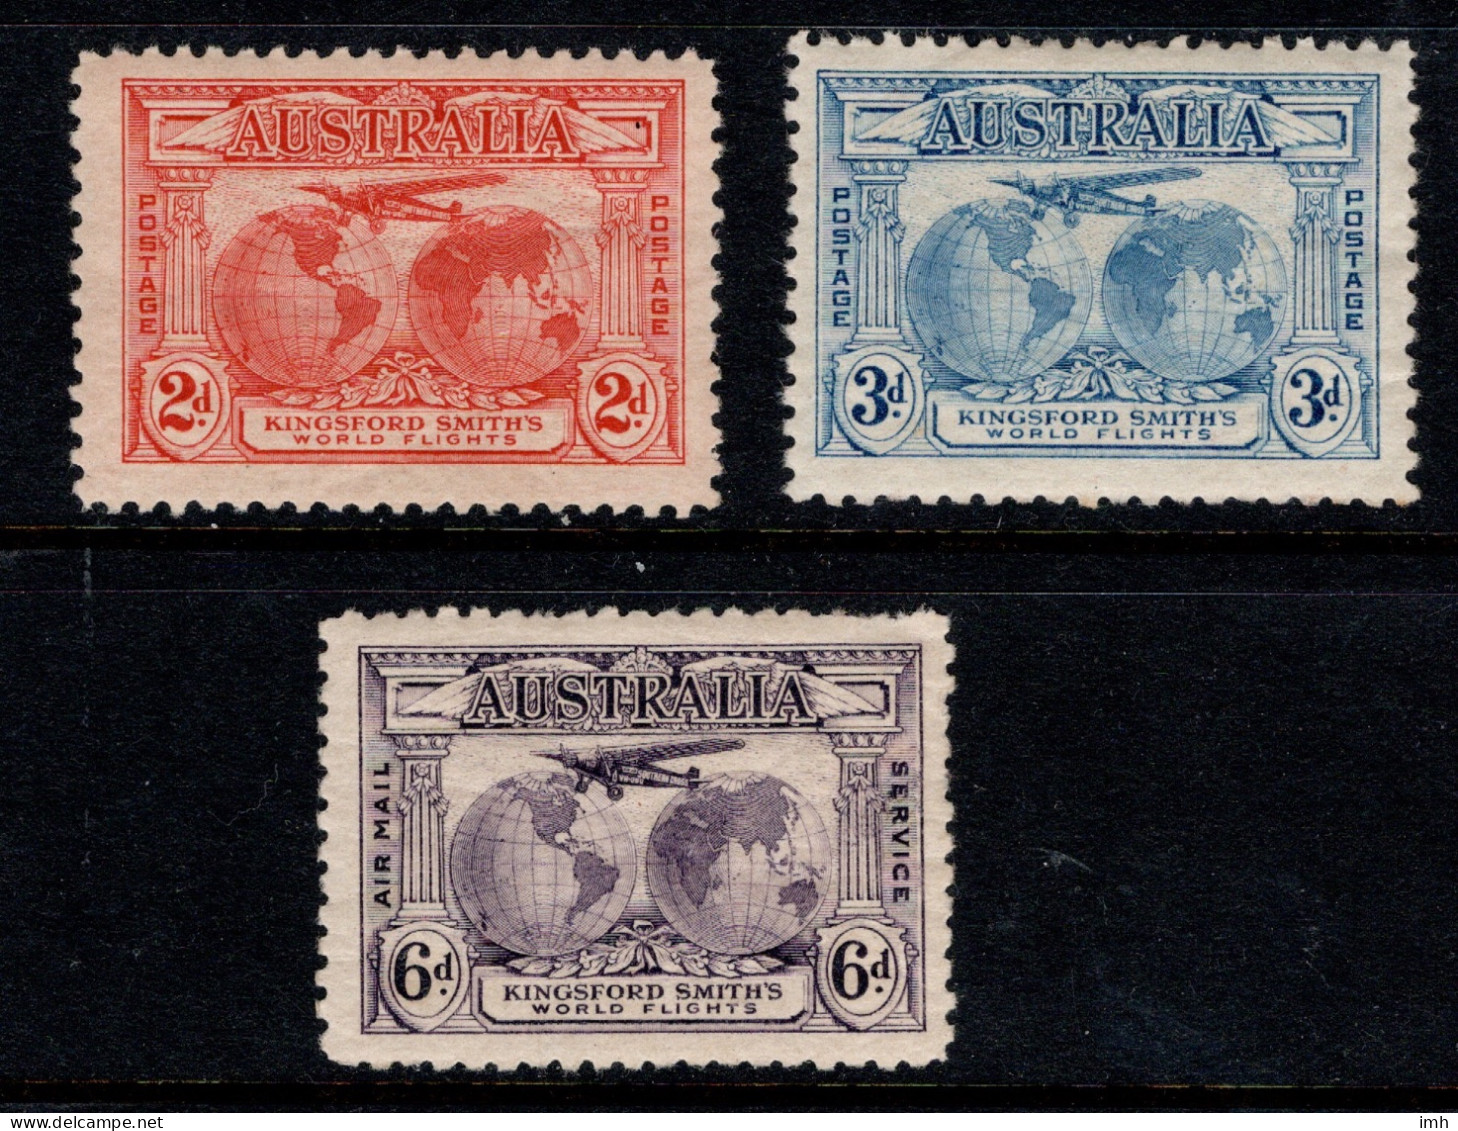 1931 Australia SG 121-123  Kingsford Smith's Flights, Complete Set Airplane, Globes Maps. Mint Lightly Hinged. Cat £15. - Nuevos